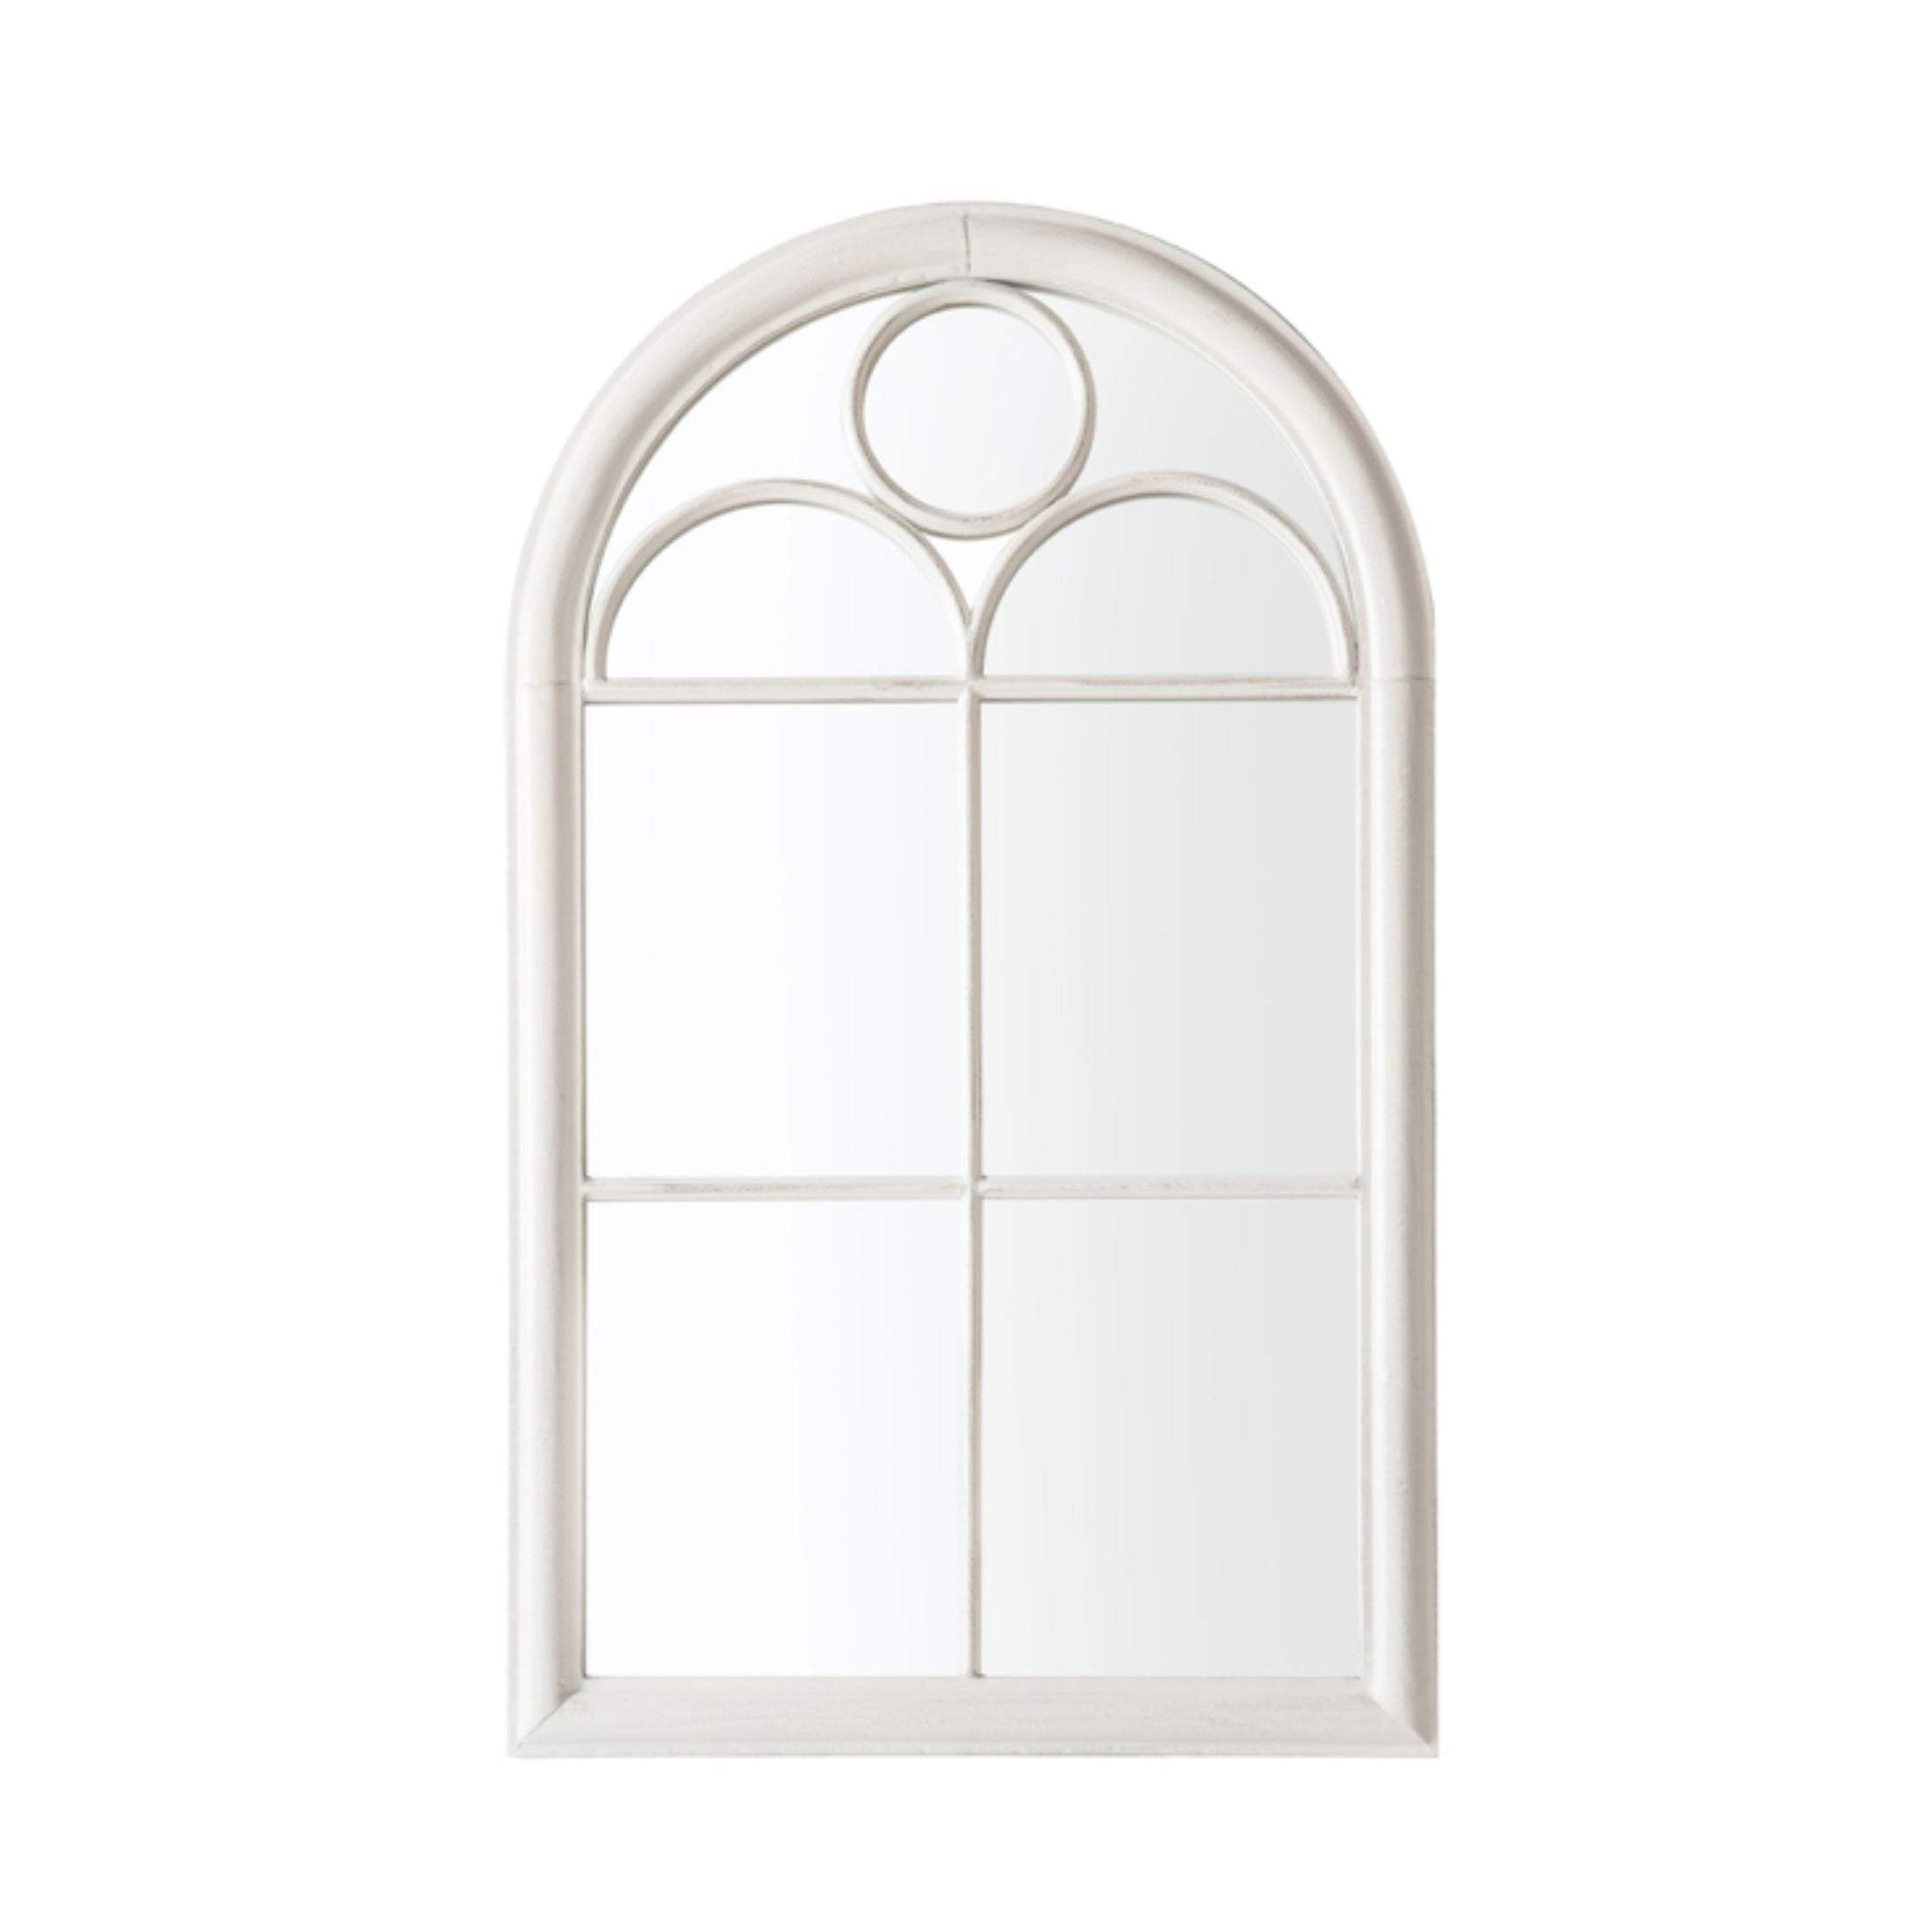 Distressed White Arched Outdoor Garden Wall Mirror 3